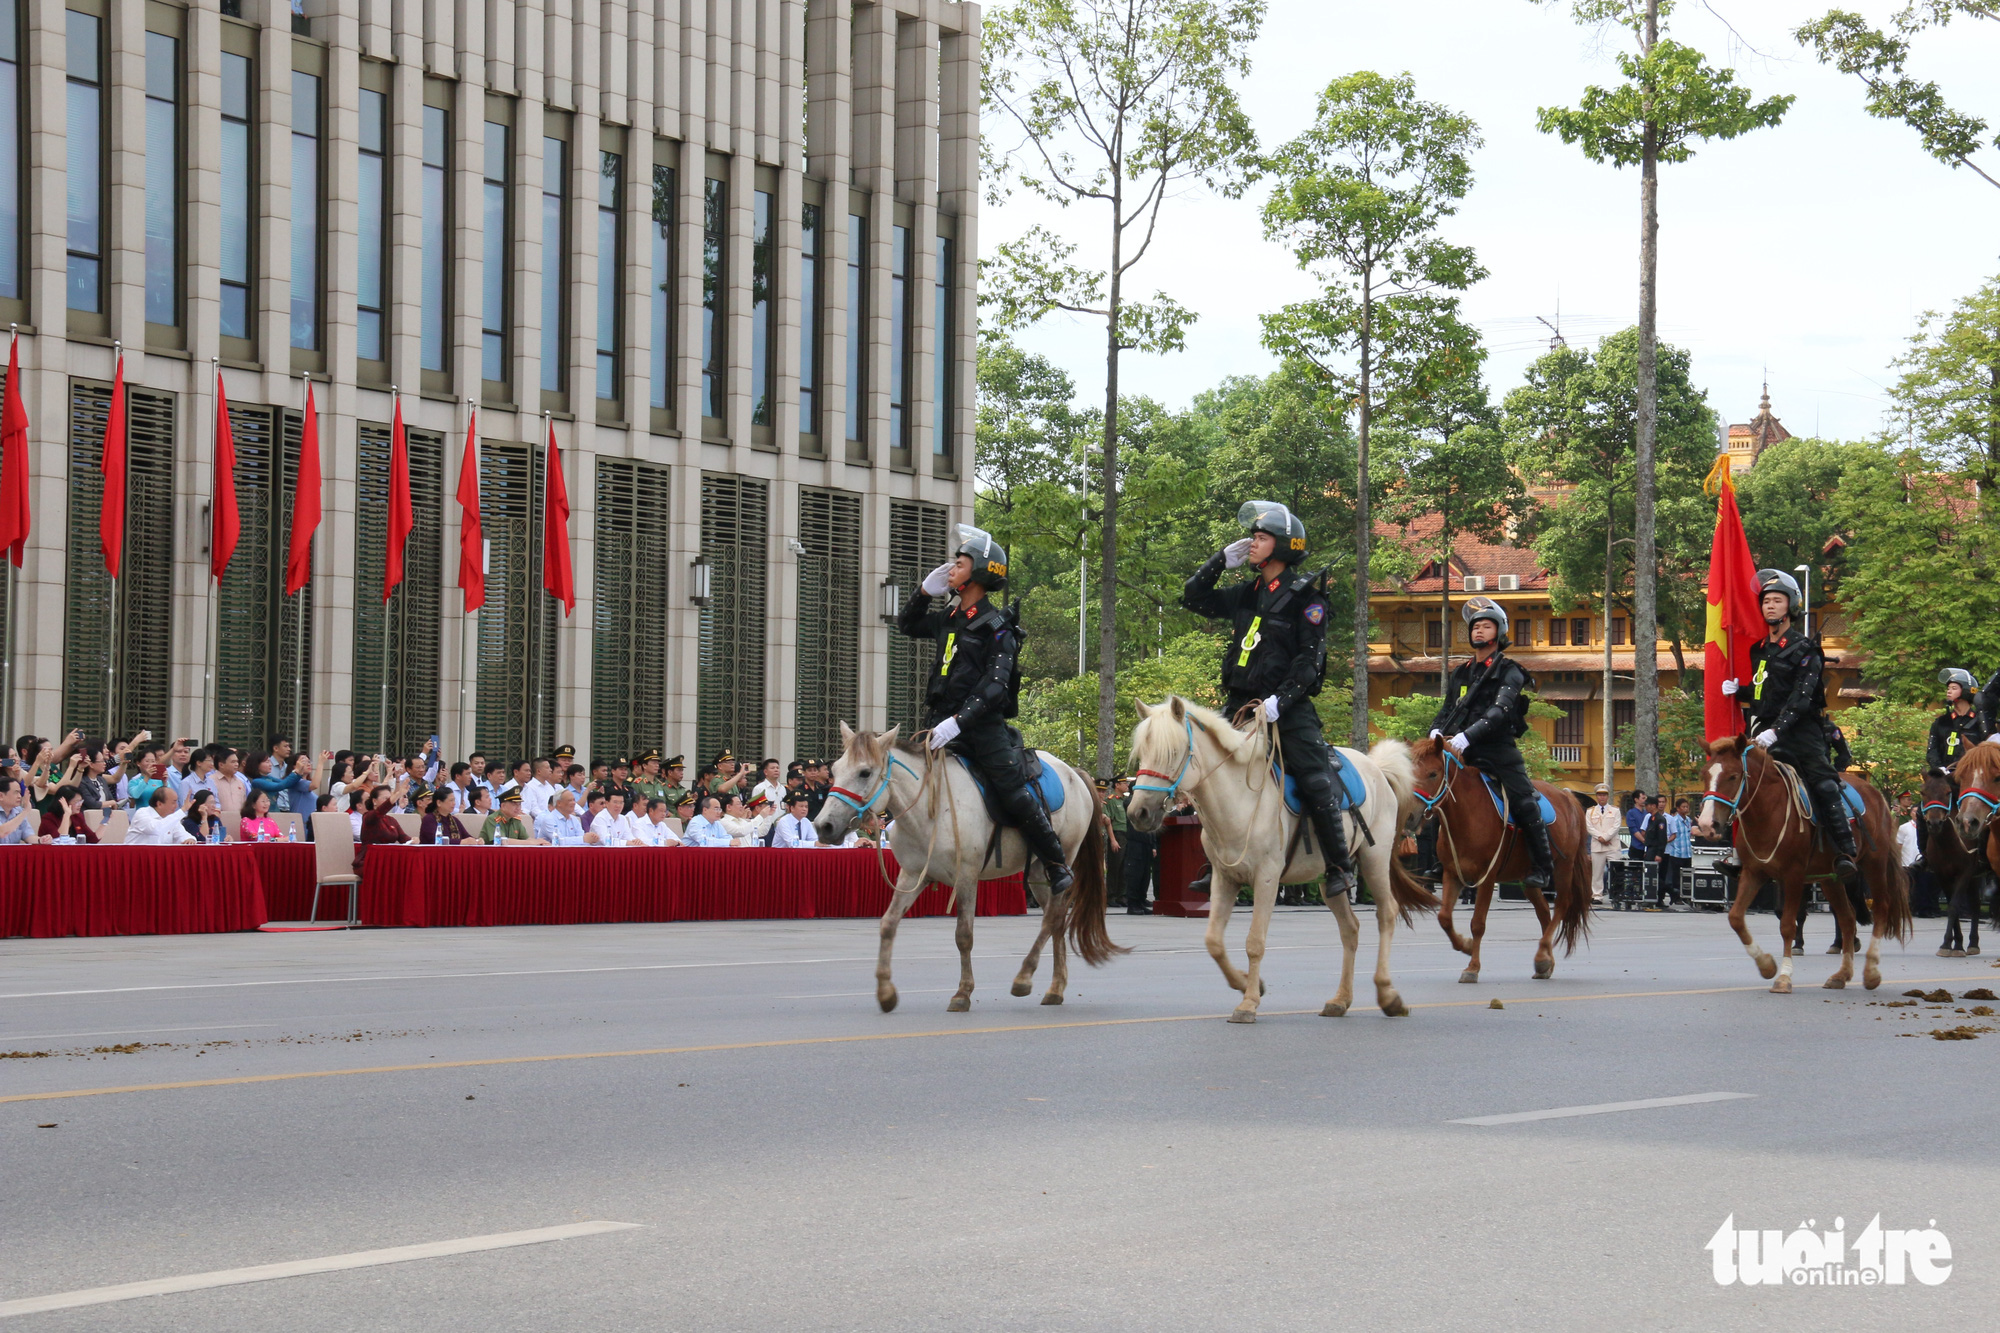 Officers from the Mounted Mobile Police Corps march during a ceremony at Ba Dinh Square in Hanoi, Vietnam, June 8, 2020. Photo: Tien Long / Tuoi Tre